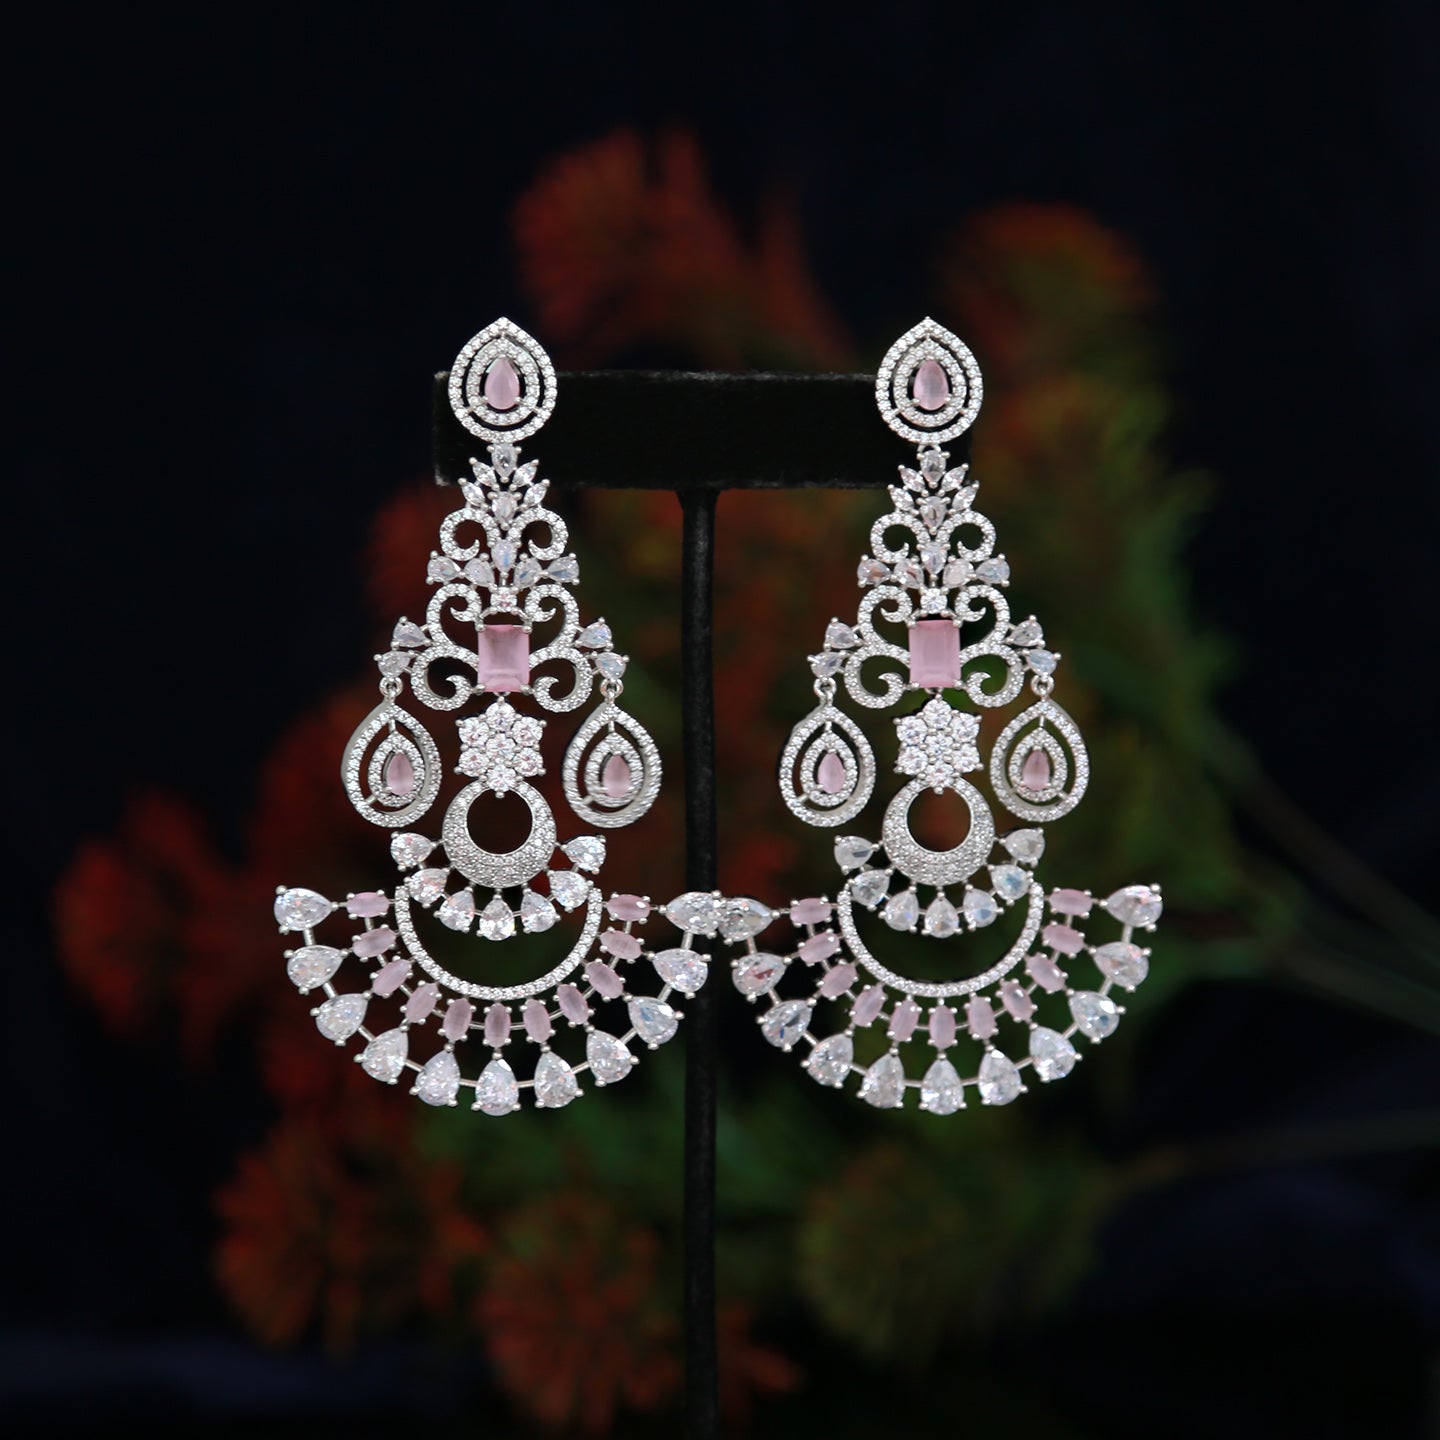 Silver American Diamond Chandbali Earrings | Traditional Ethnic Party wear Earrings |High Quality Indian Jewelry Earrings | Gift for Her